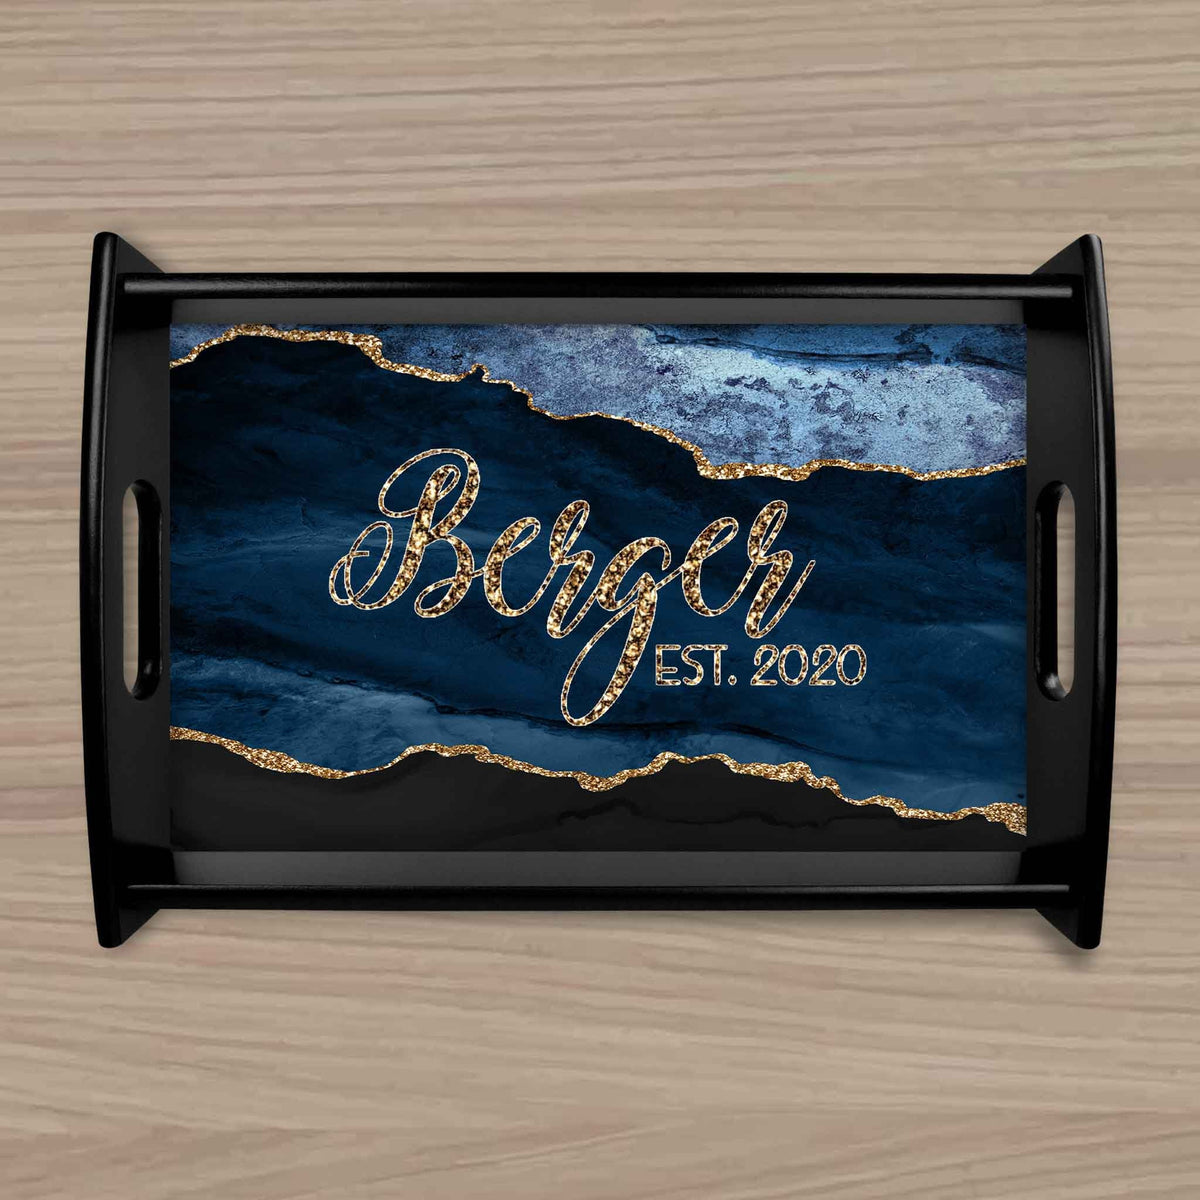 Custom Wood Serving Tray | Persoanlized Kitchen Accessories | Navy and Gold Agate